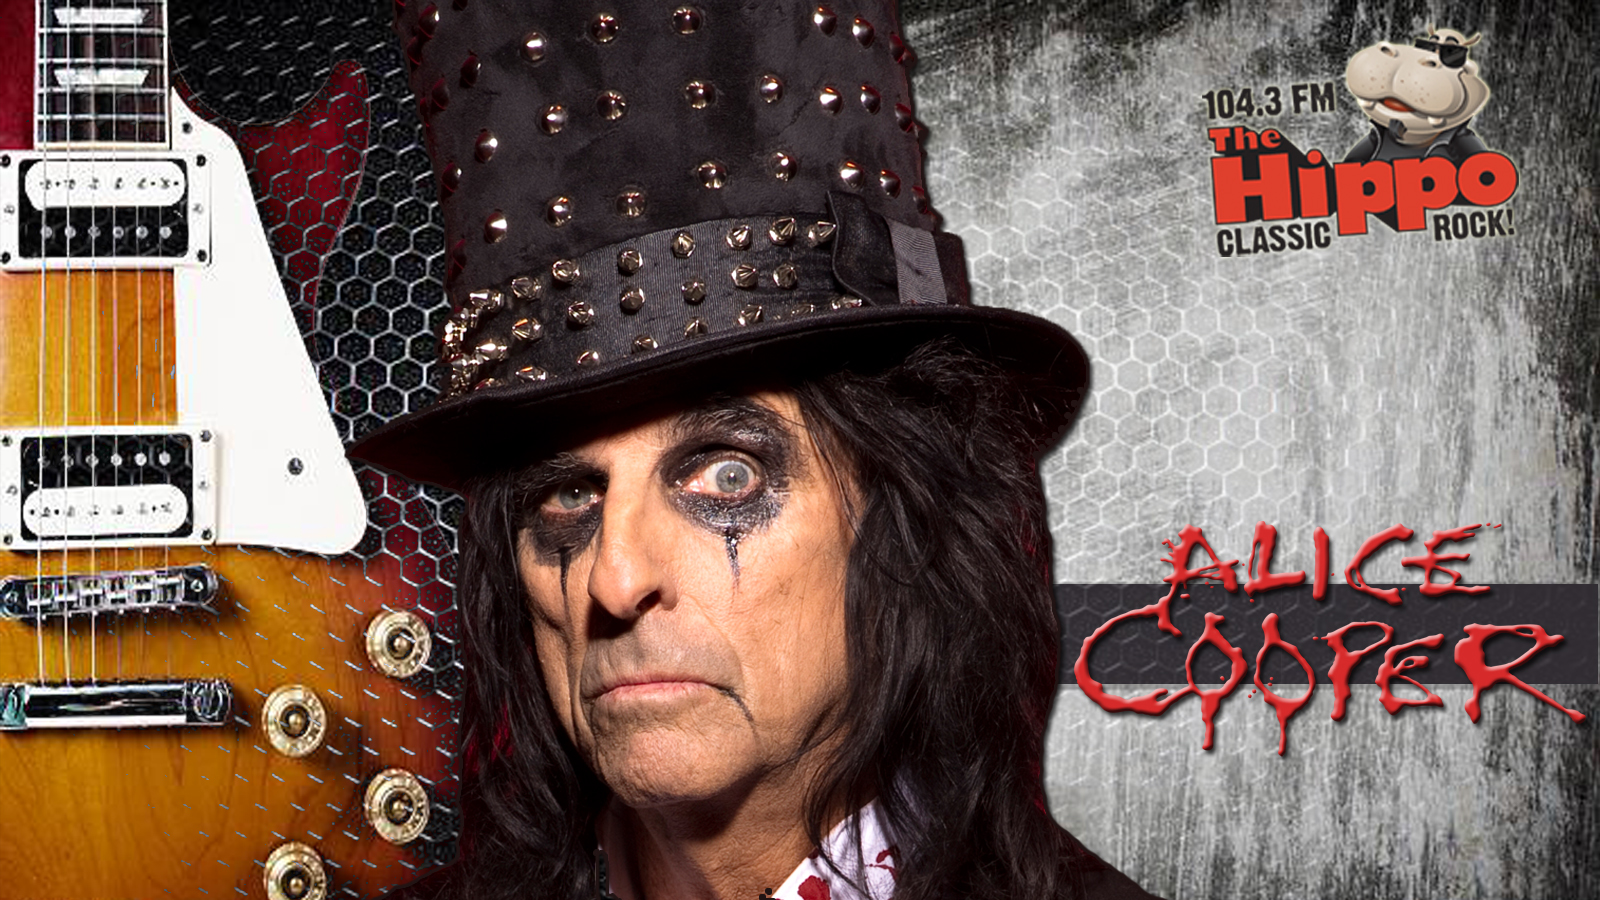 Nights with Alice Cooper